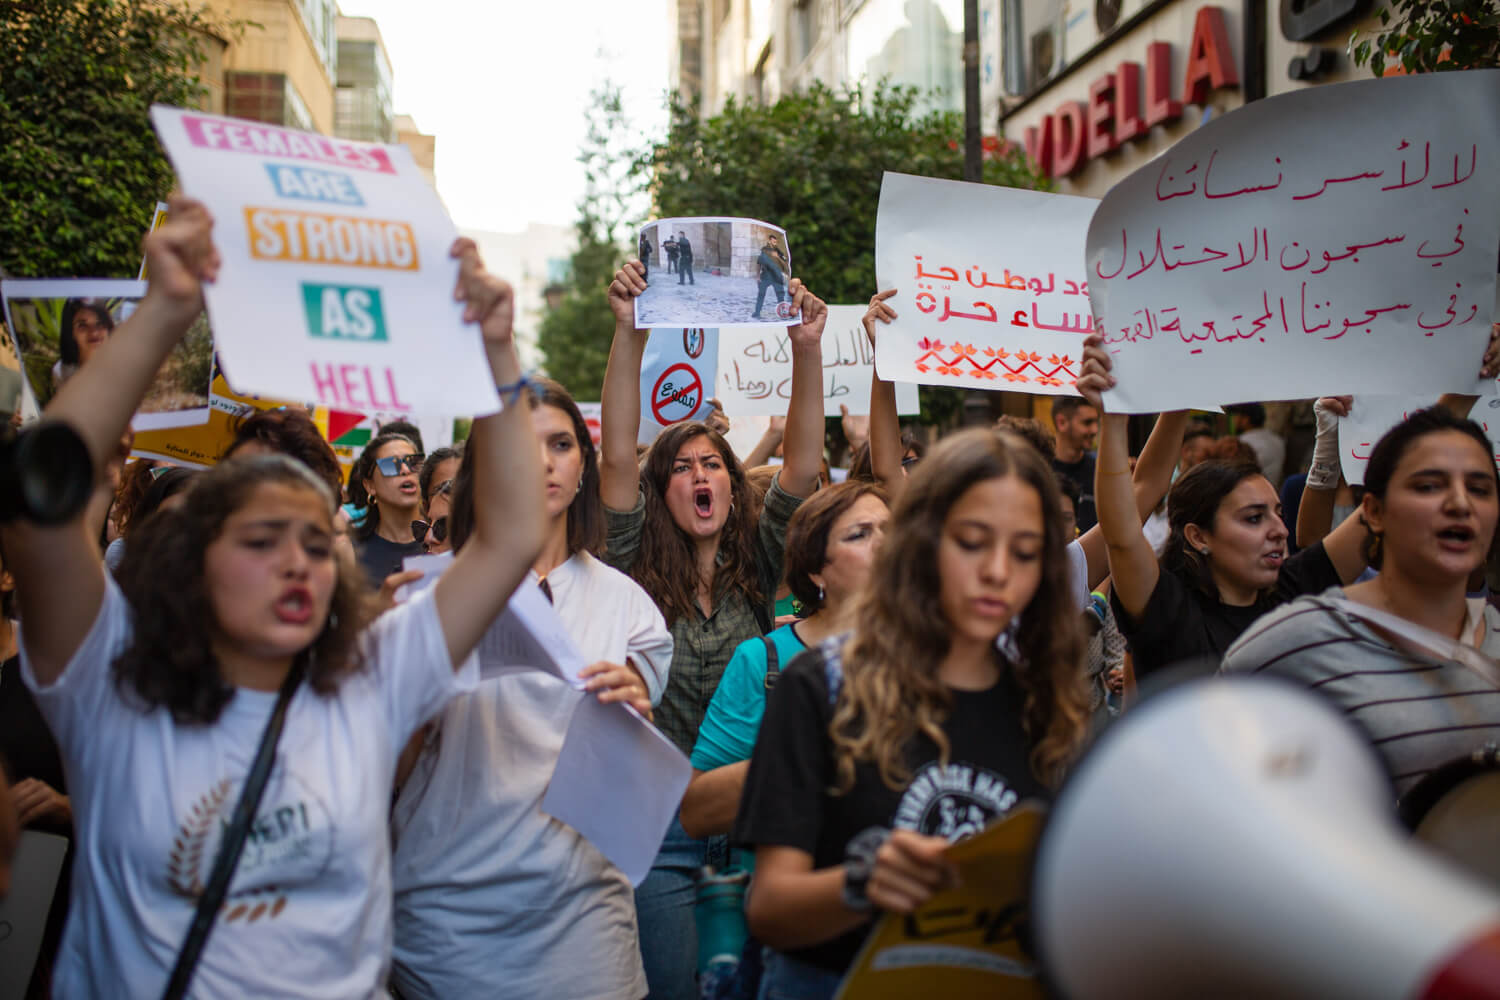 Palestinian women in the Tal'at movement protest in Ramallah on September 26, 2019. (Photo: Tal'at)